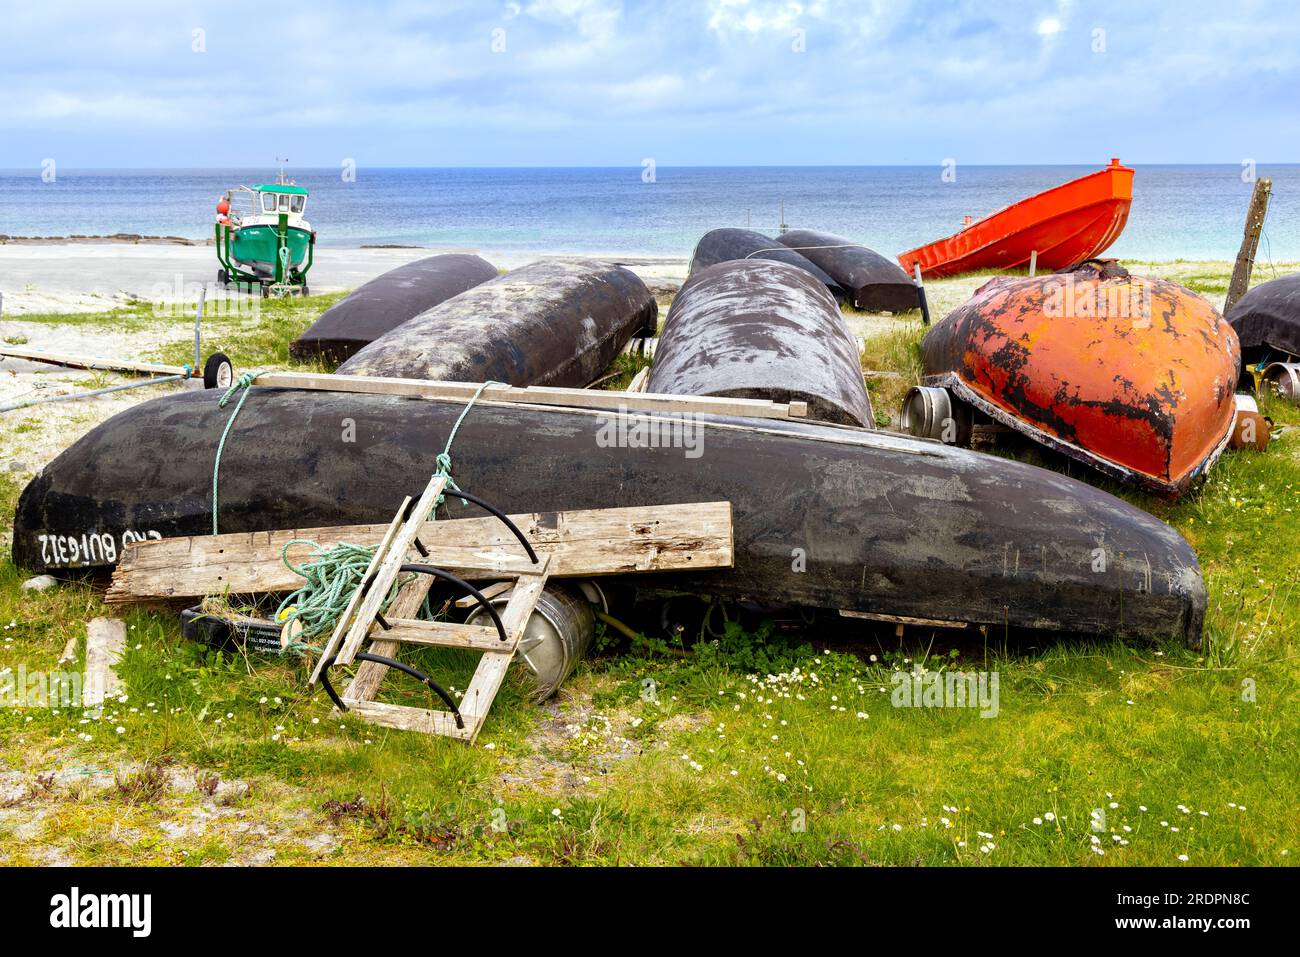 Currachs, traditional Irish fishing boats, lying upturned on Inisheer beach, the smallest of Aran Islands, Galway Bay, Republic of Ireland. Stock Photo